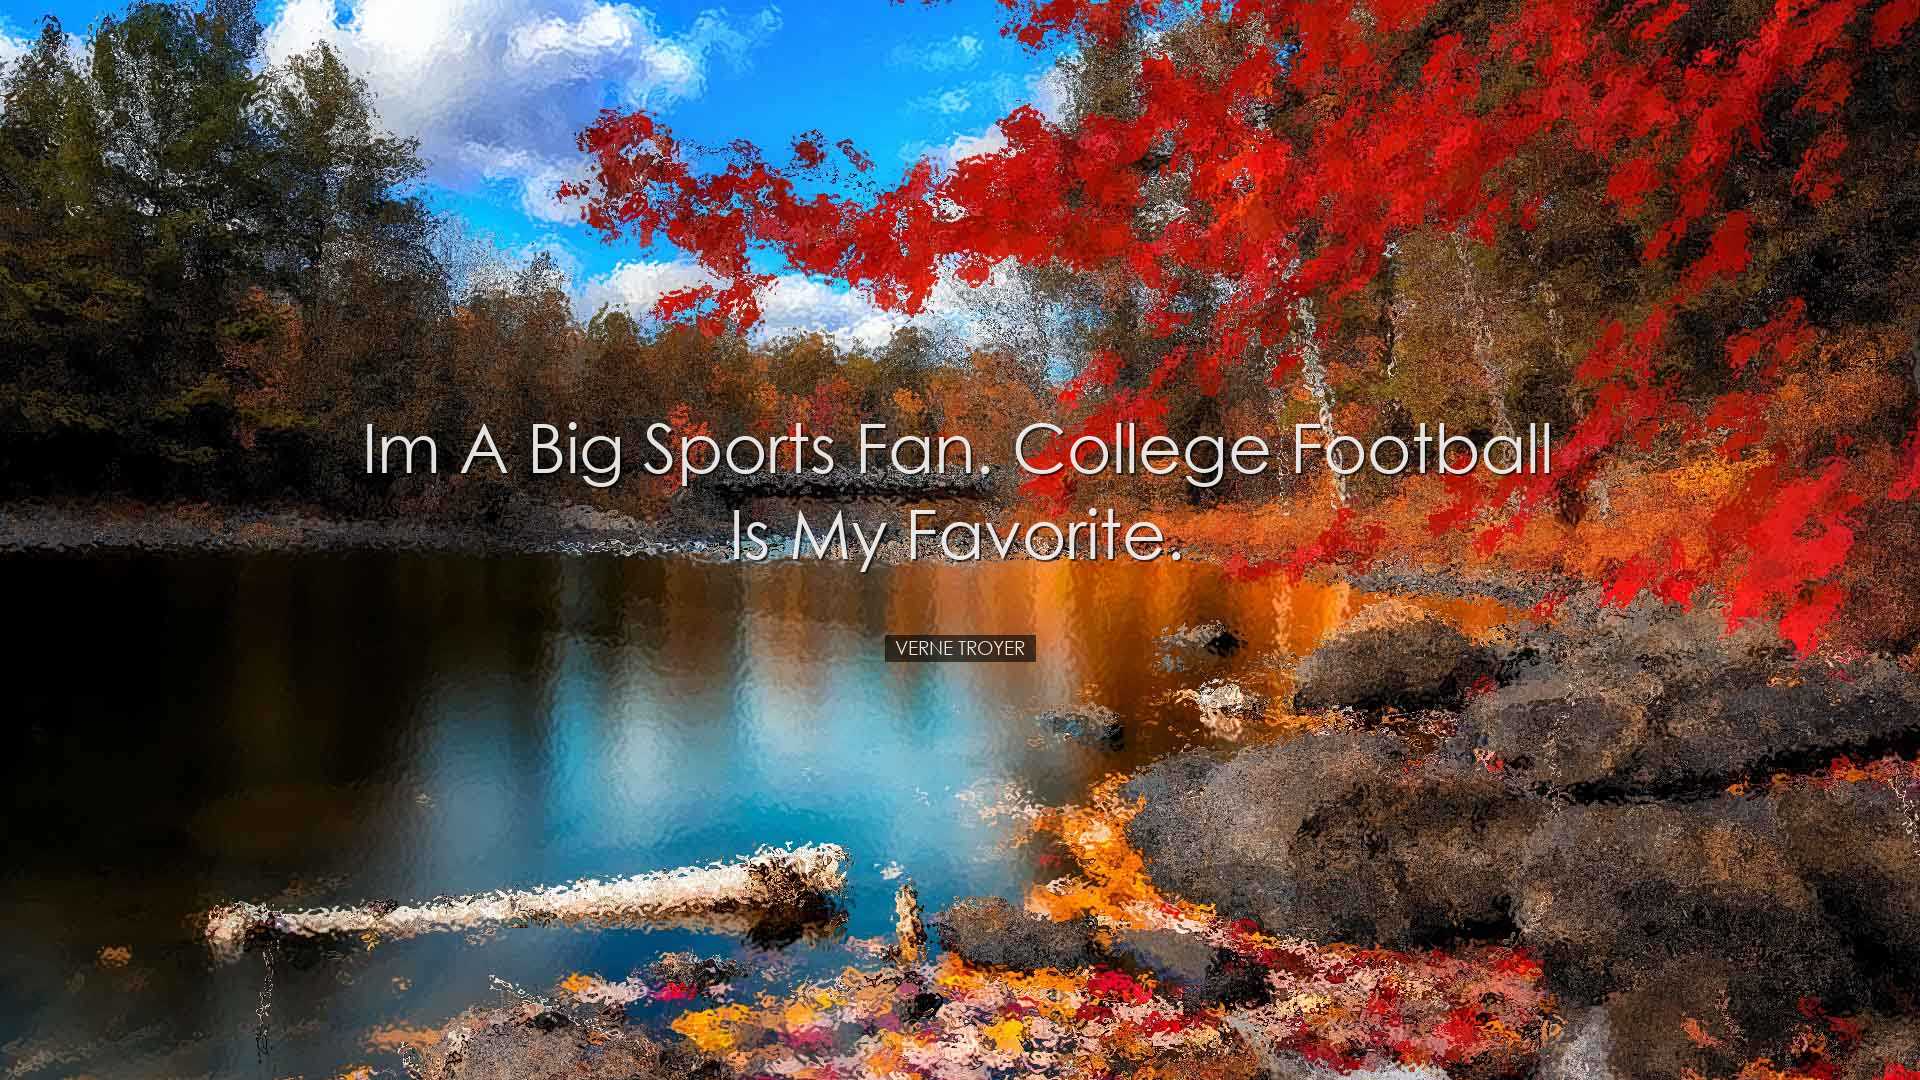 Im a big sports fan. College football is my favorite. - Verne Troy